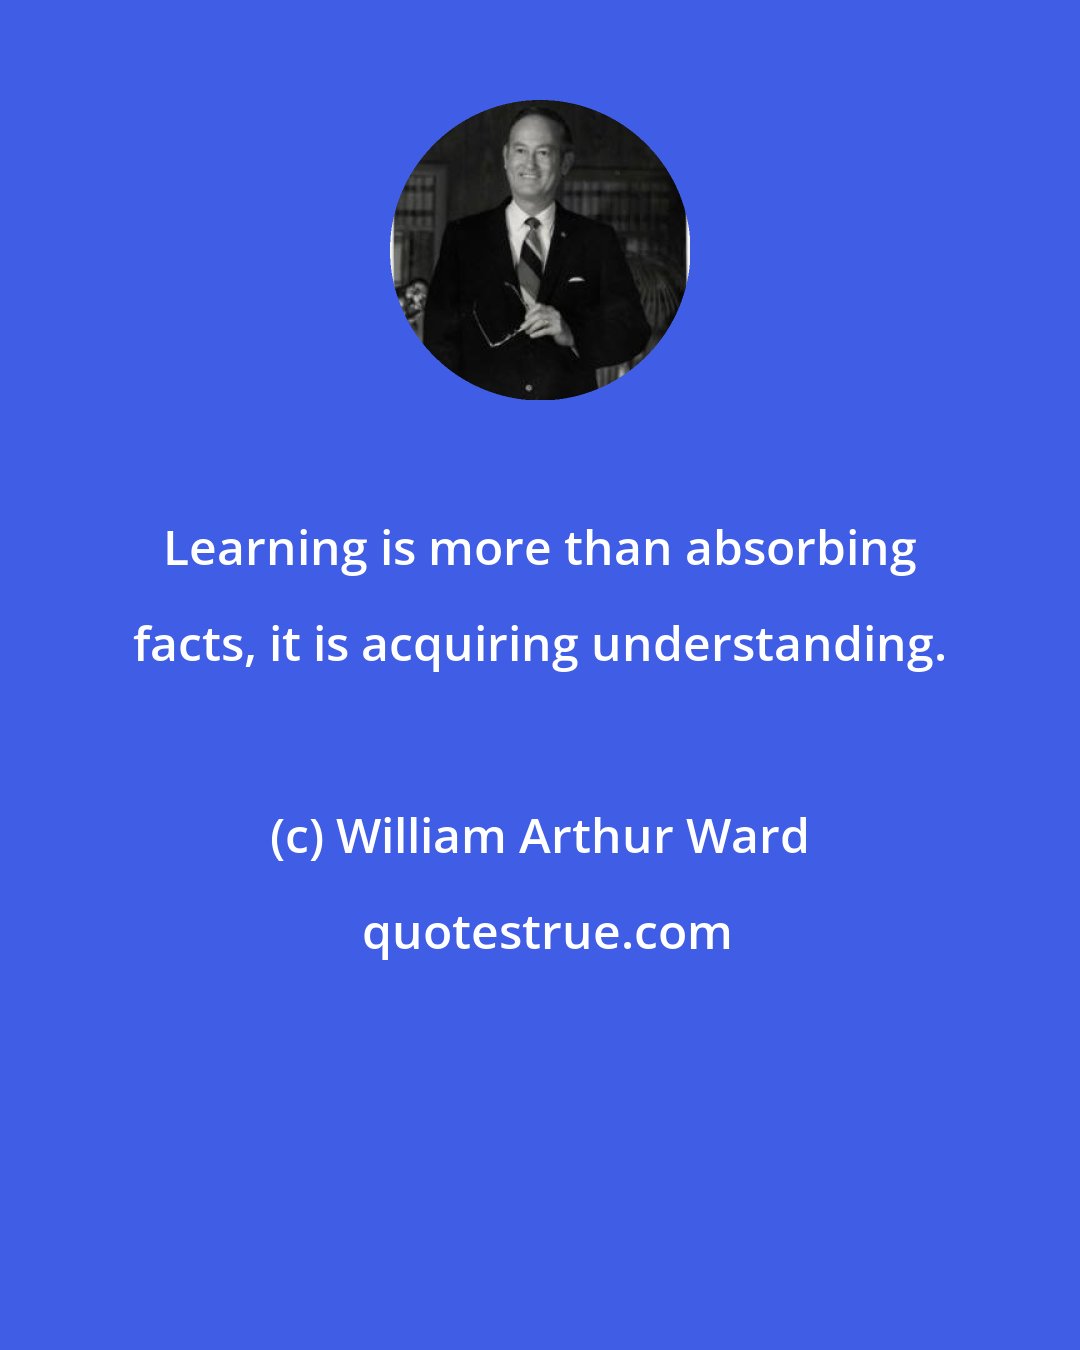 William Arthur Ward: Learning is more than absorbing facts, it is acquiring understanding.